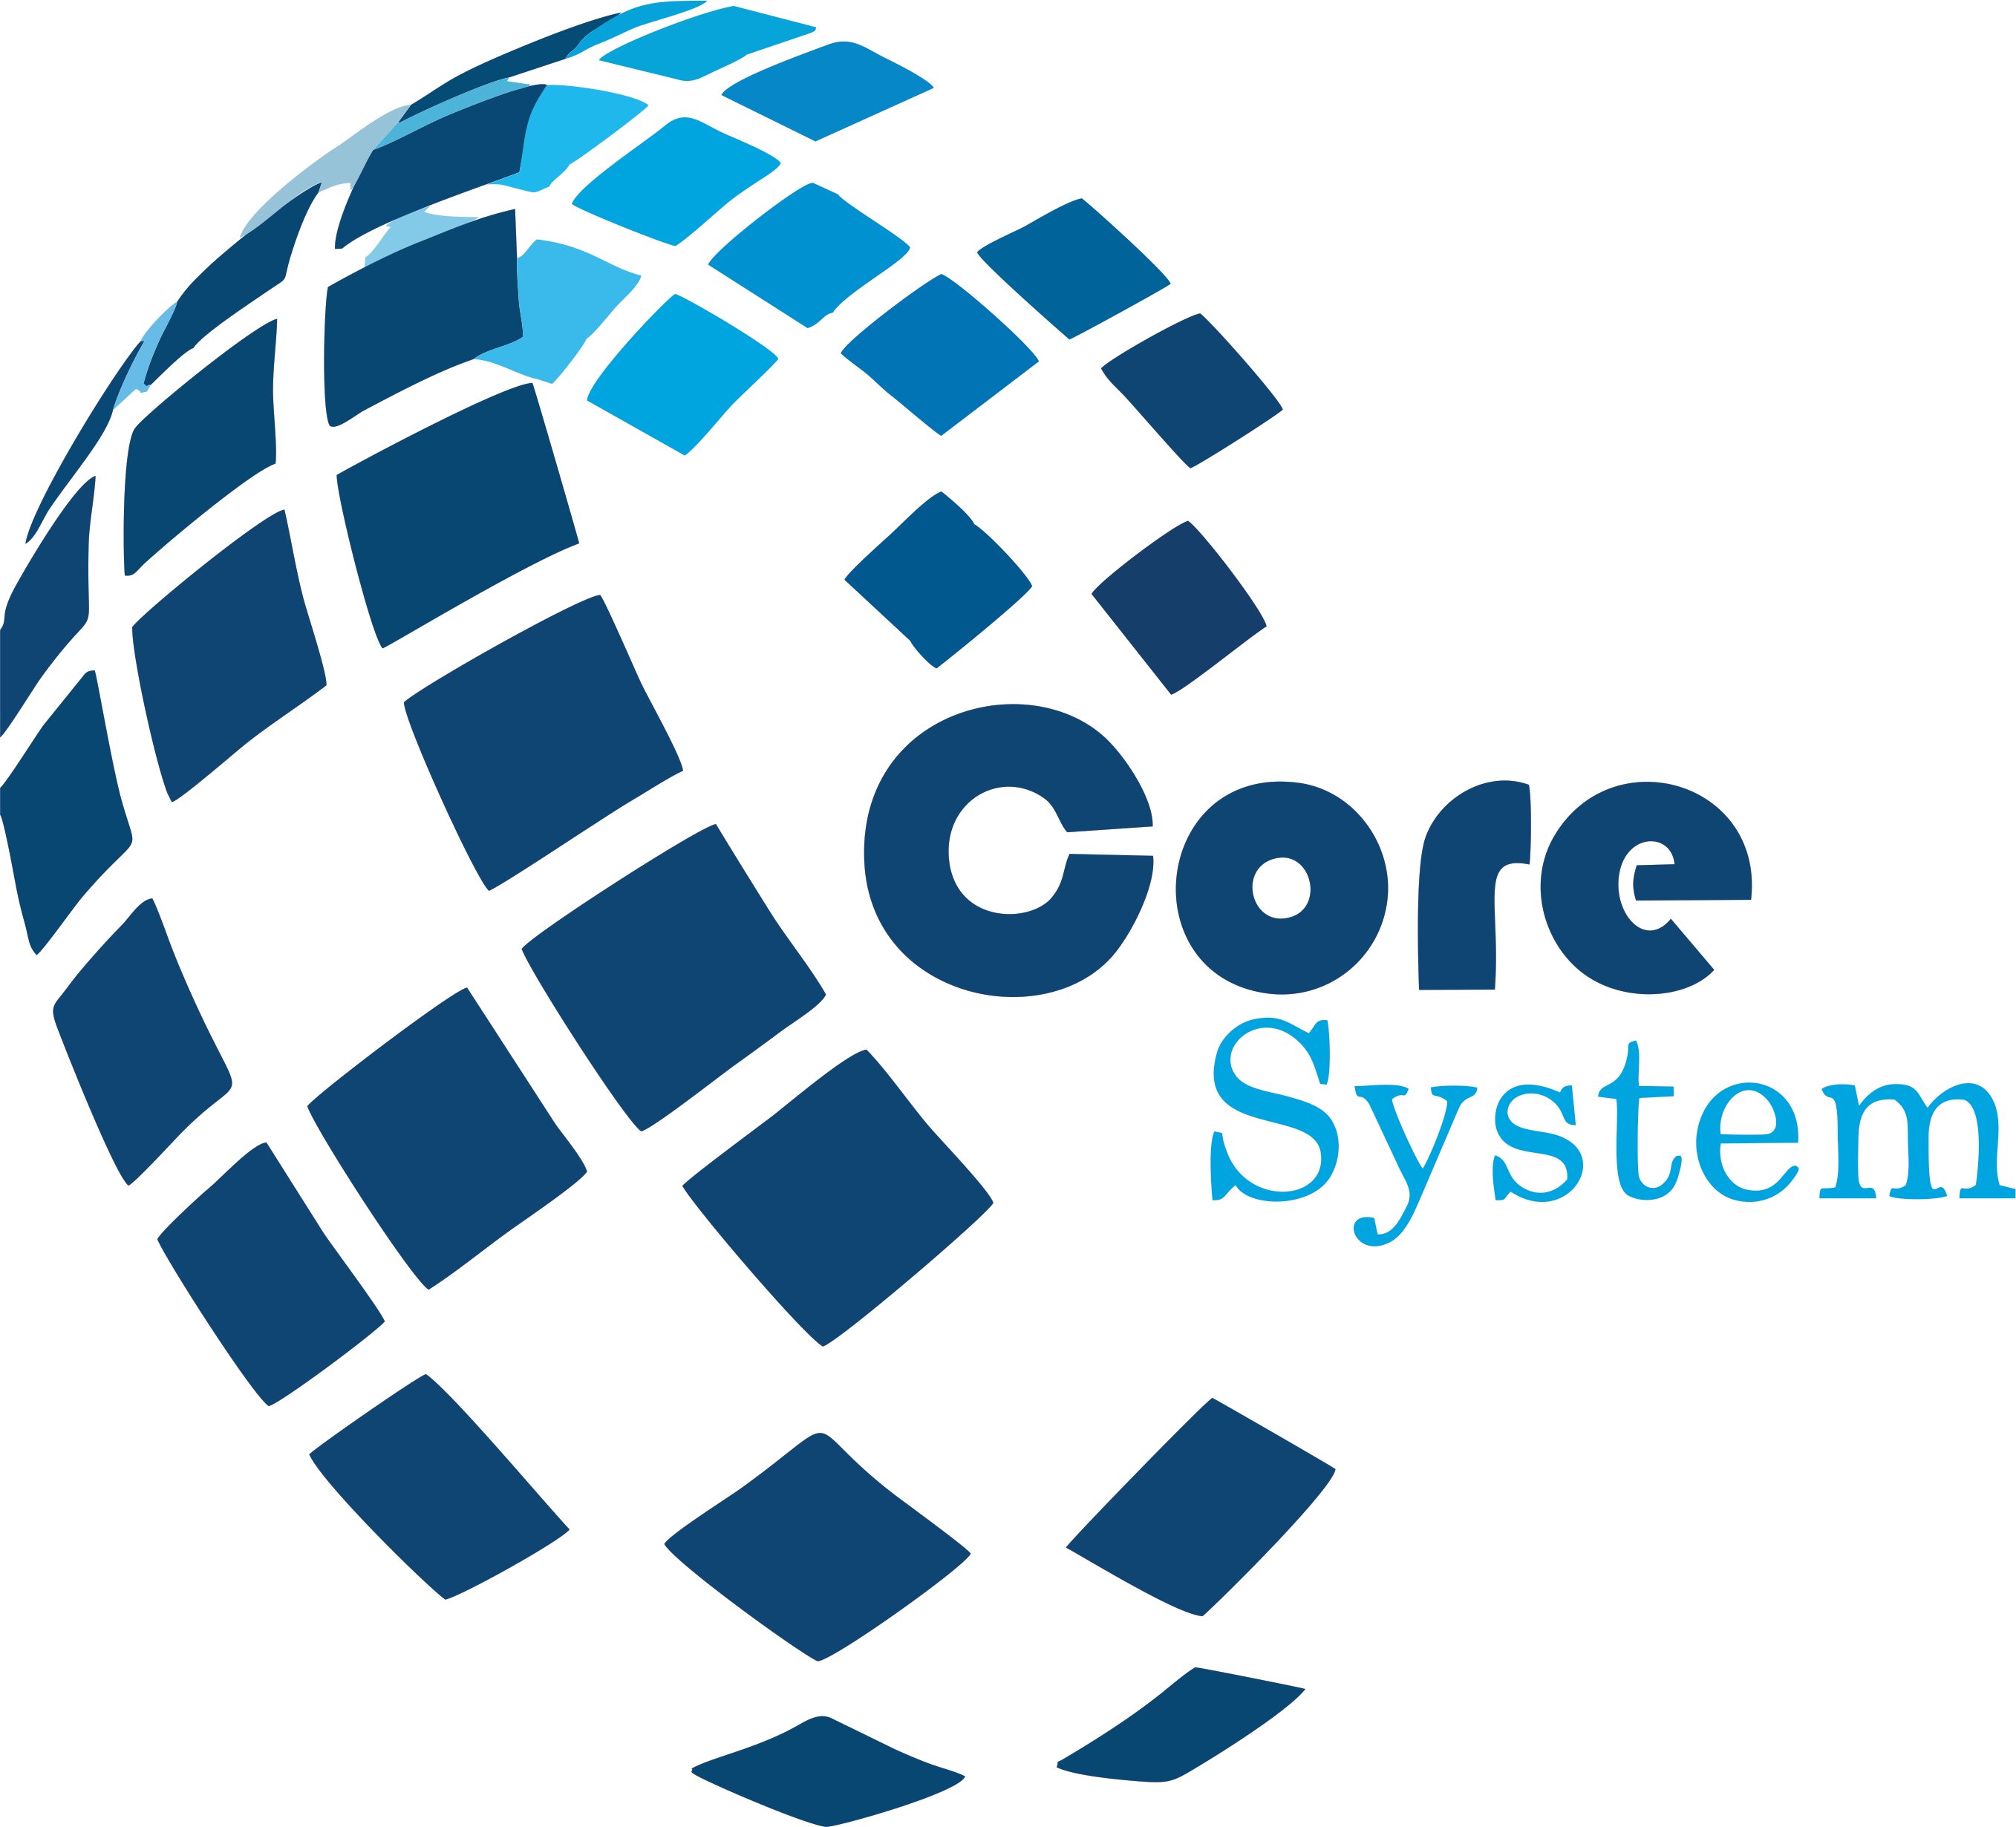 Core System